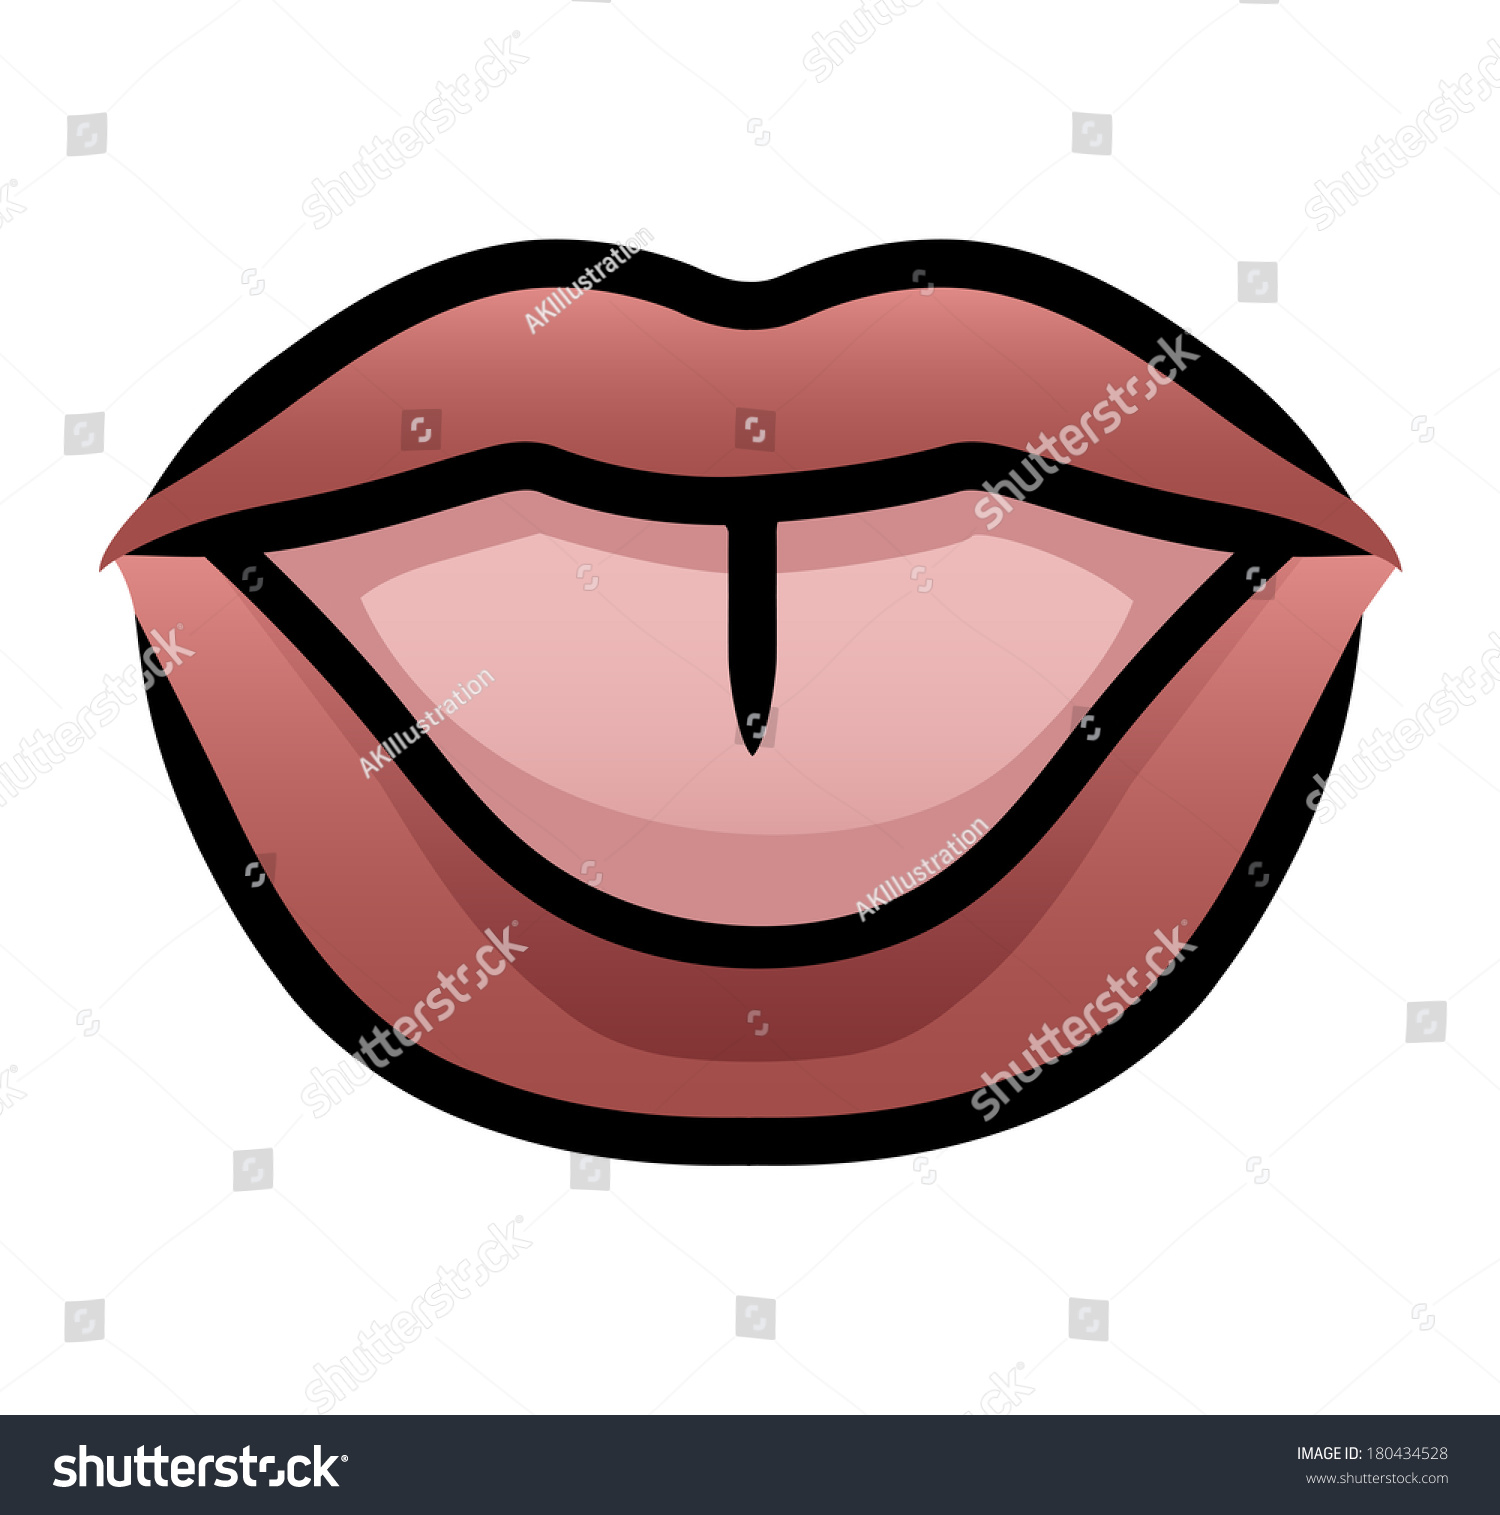 Illustration Cartoon Mouth Sticking Tongue Out Stock Illustration